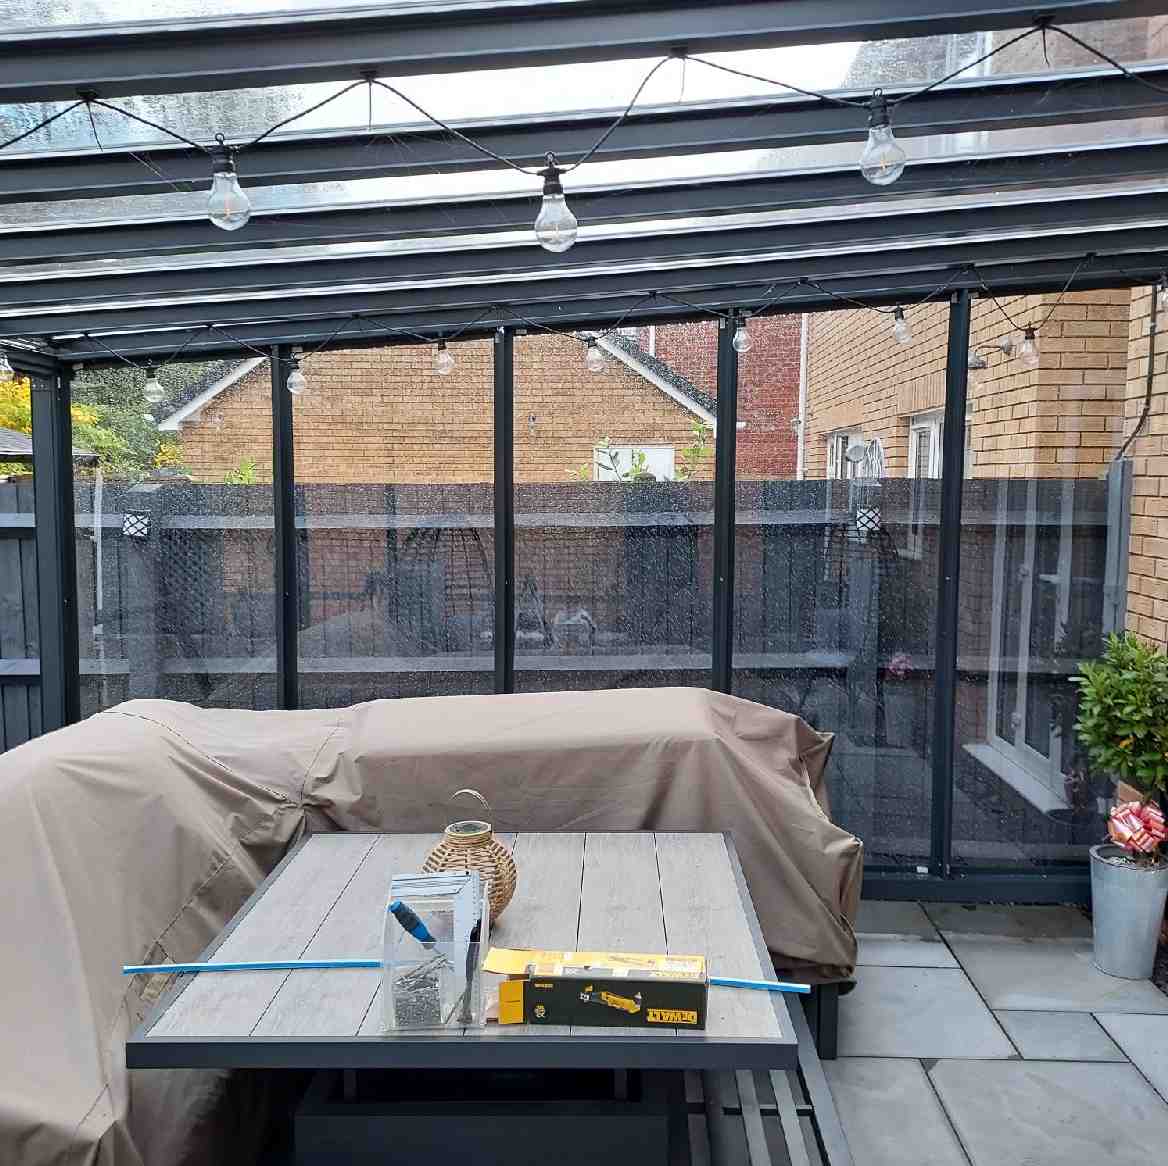 Buy Omega Smart Canopy - 'Top Triangle' In-Fill Section for Sides of Canopy, 16mm Polycarbonate In-Fill Panels, Anthracite Grey Frame online today